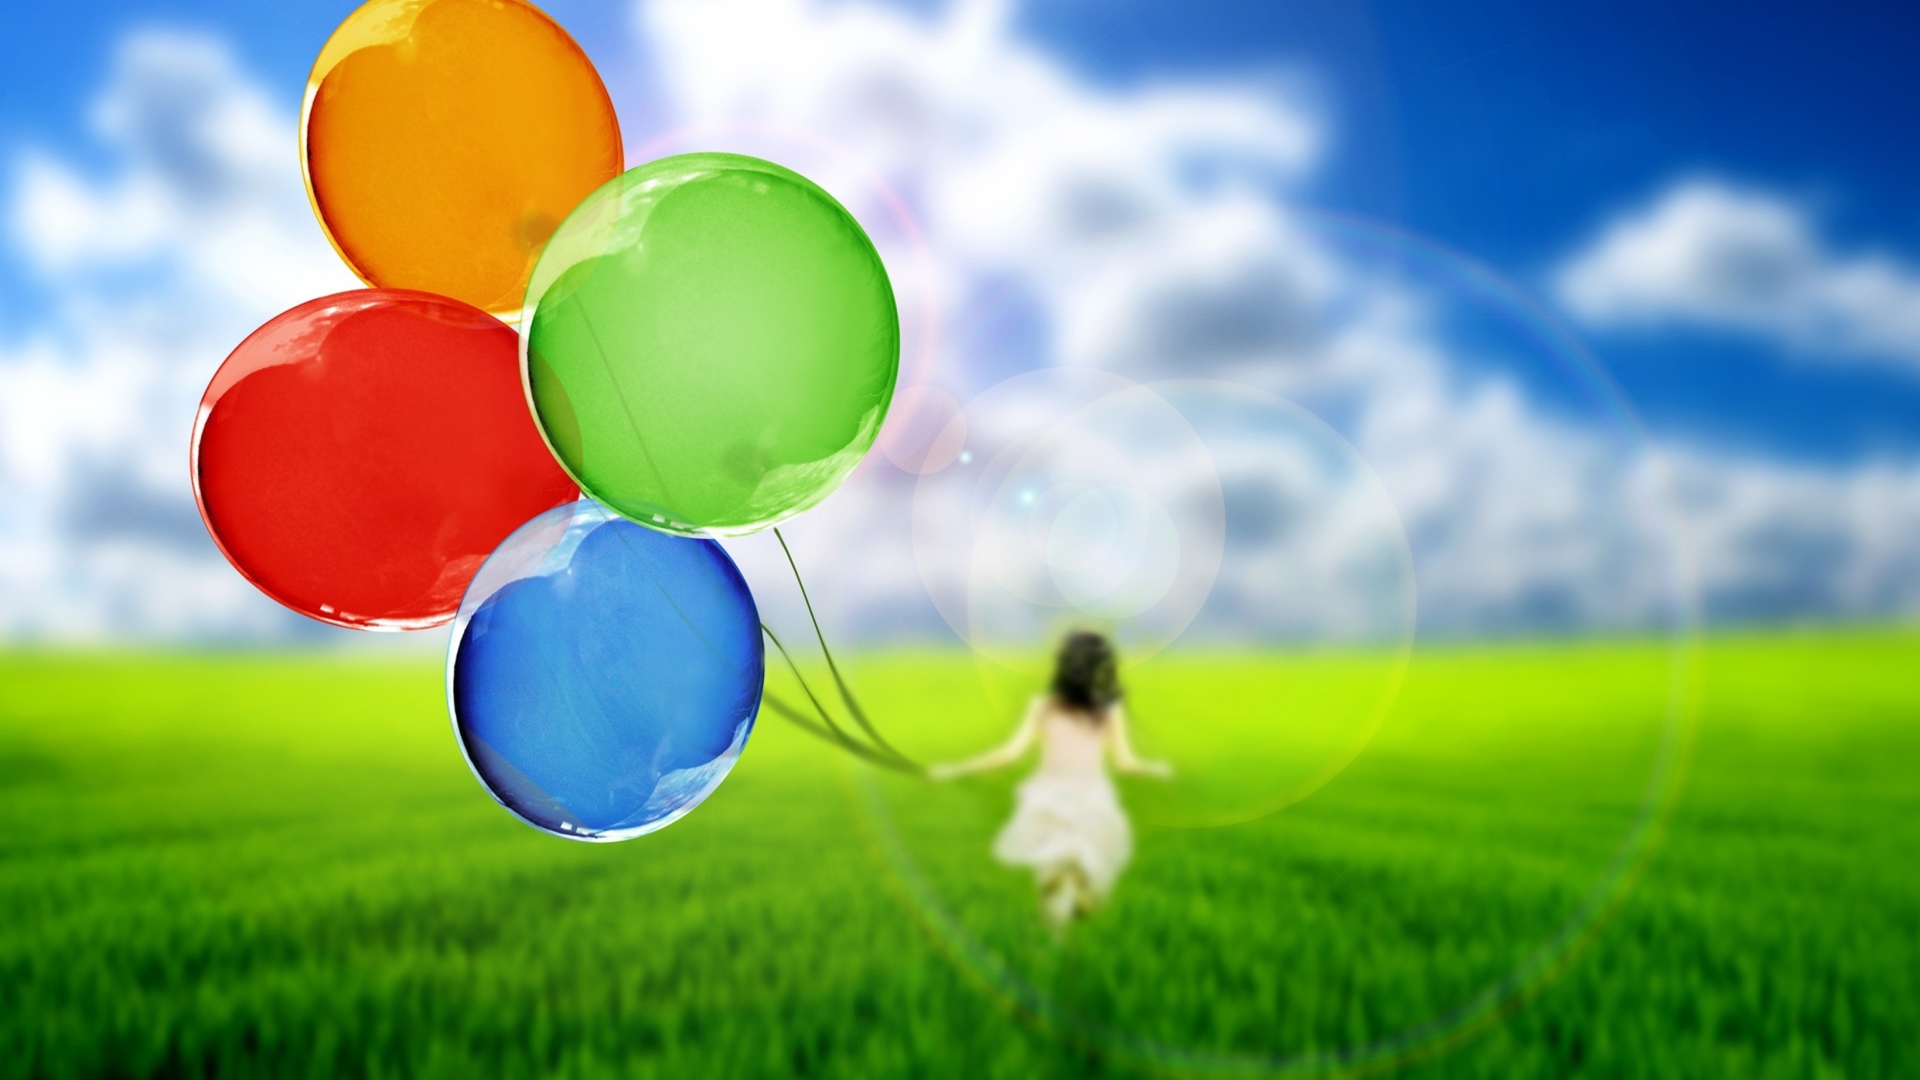 Girl Running With Colorful Balloons wallpaper 1920x1080